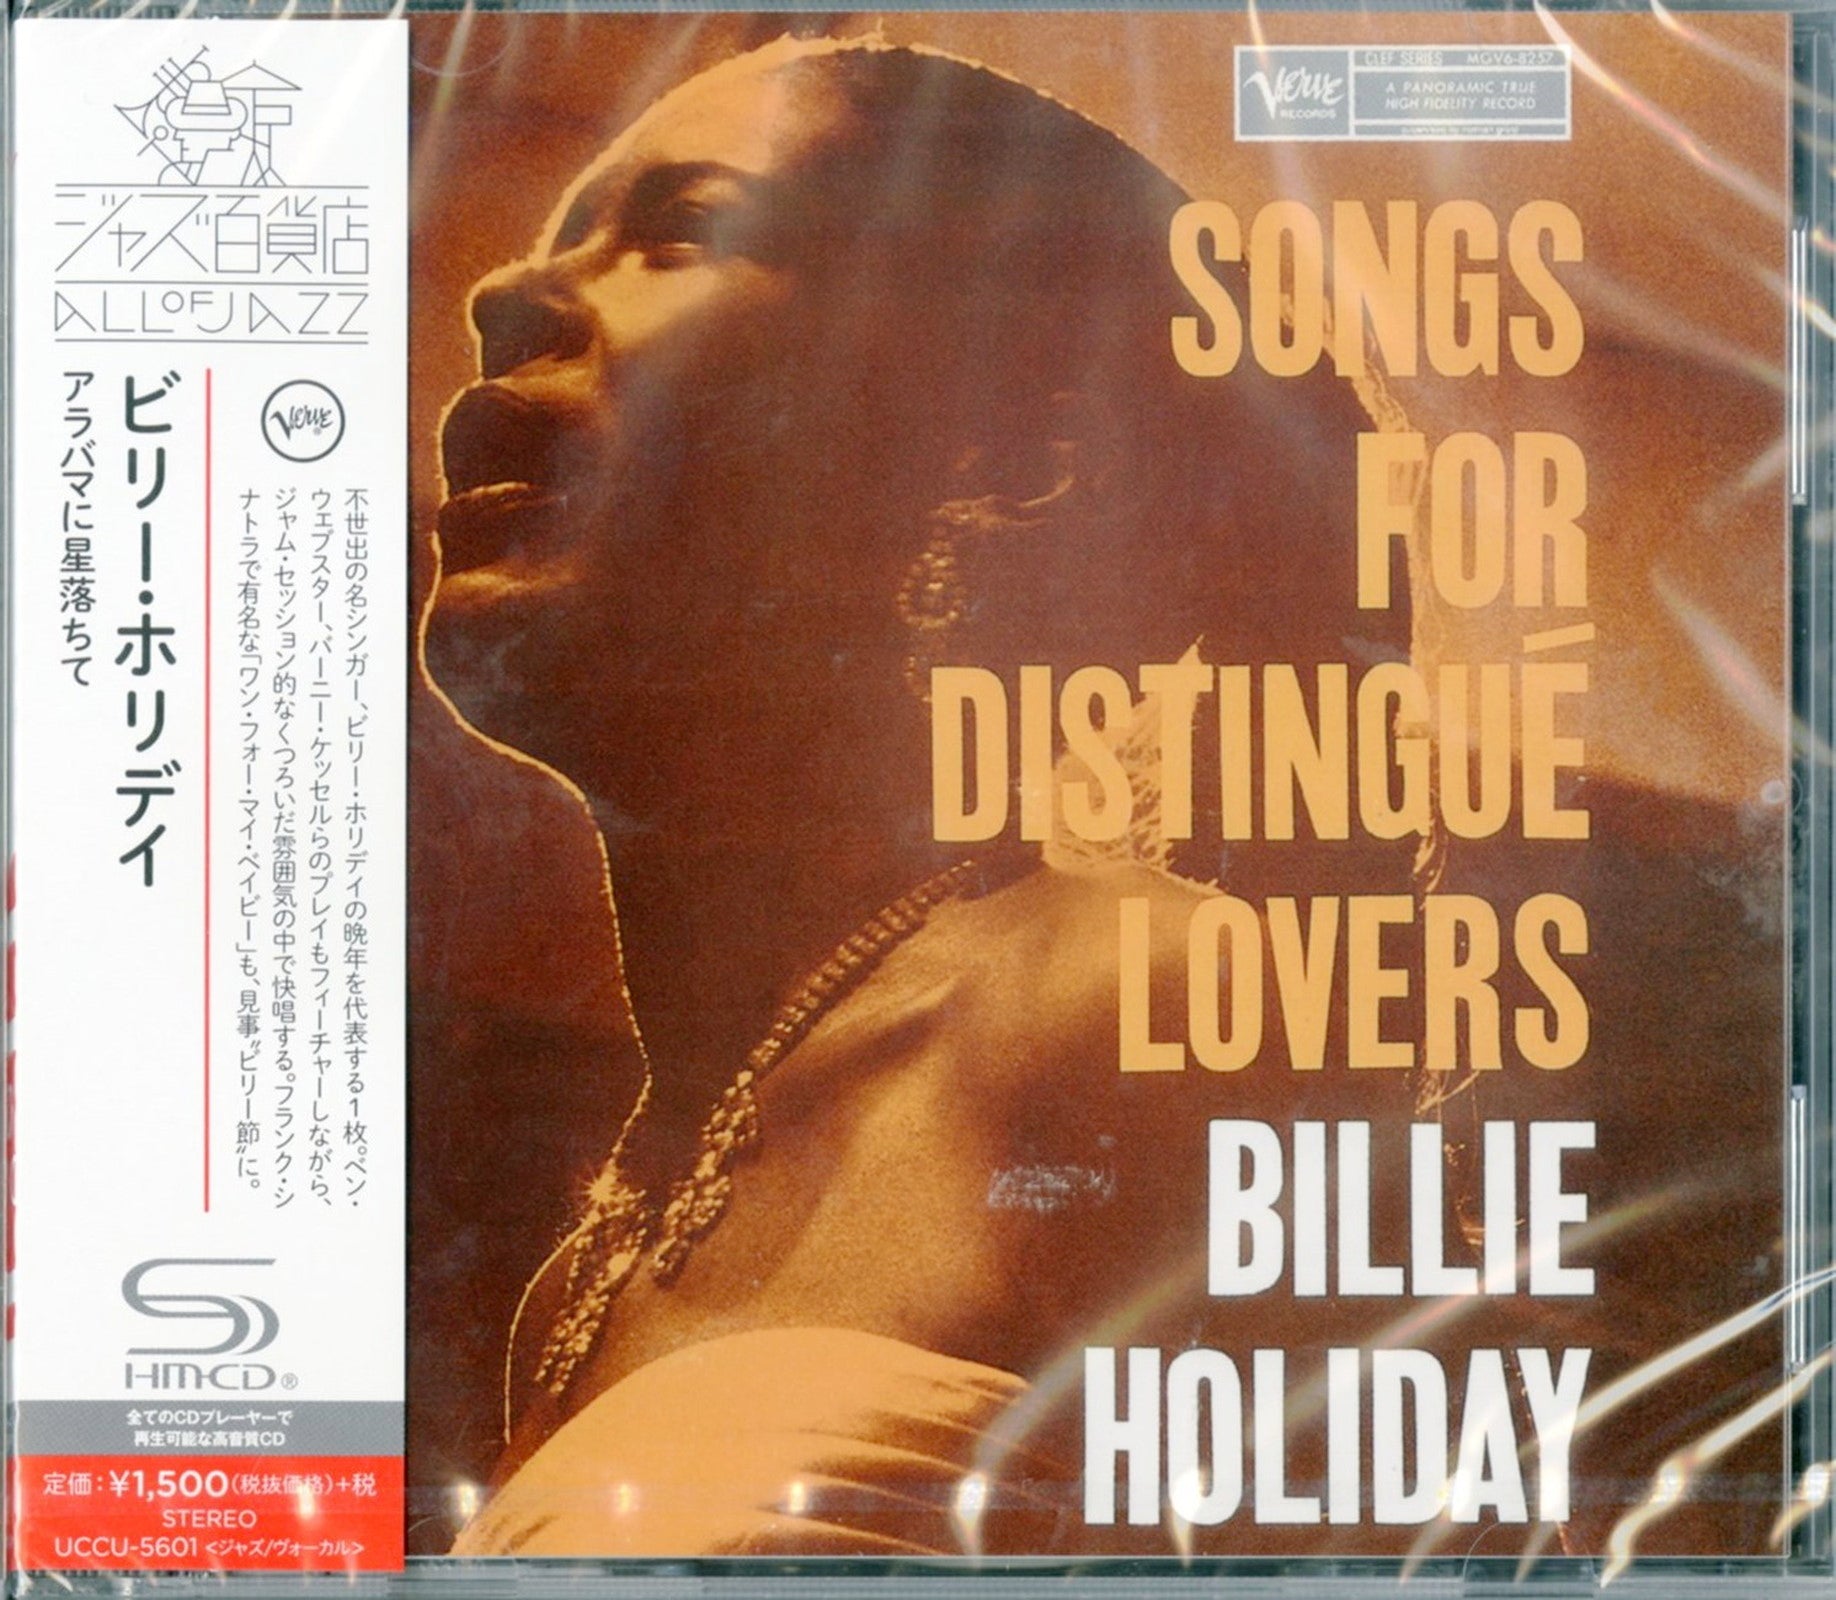 Billie Holiday - Songs For Distingue Lovers - Japan SHM-CD - CDs